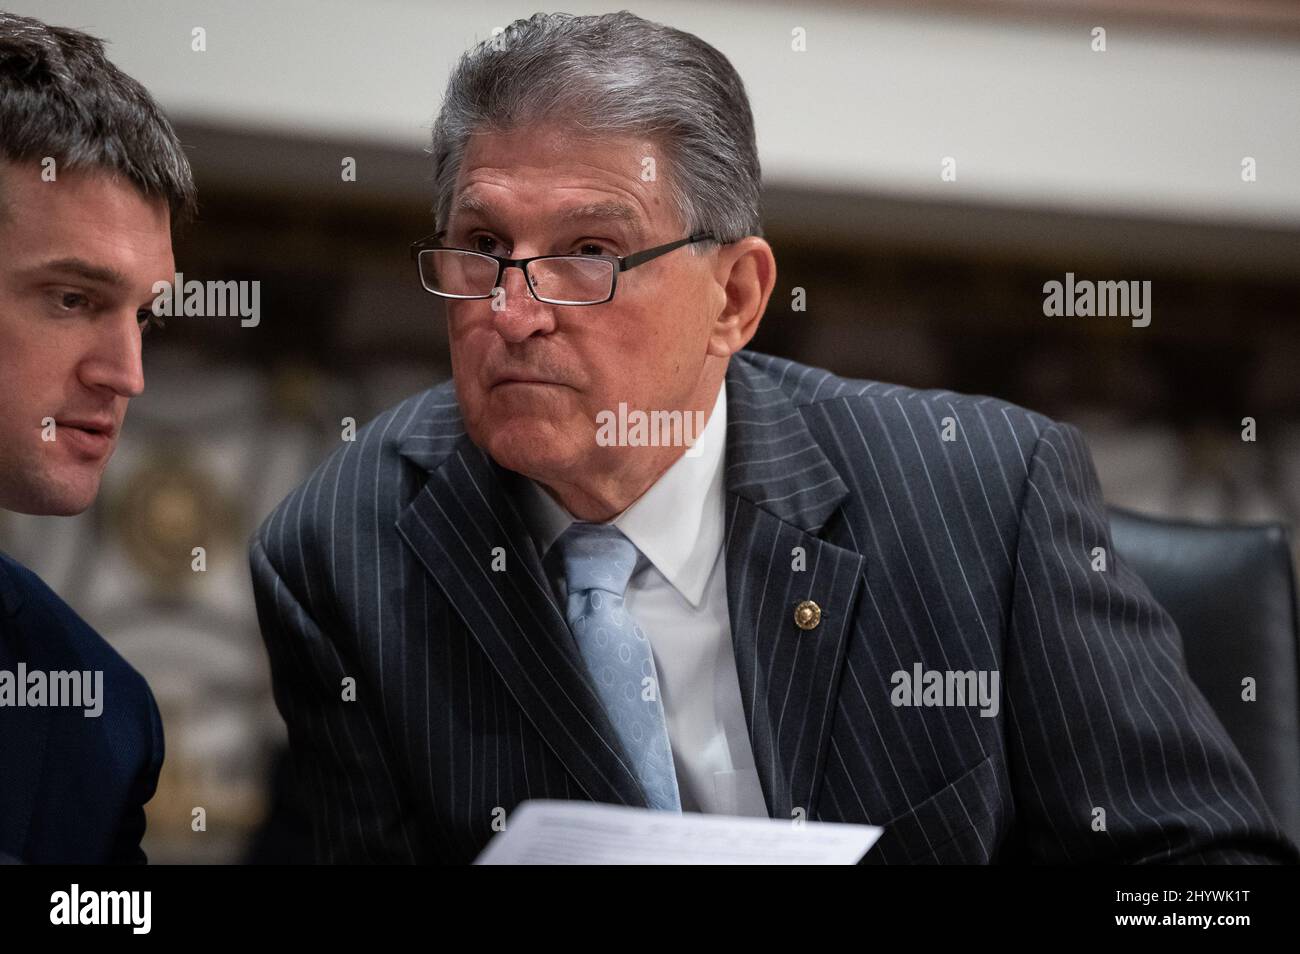 Washington, USA. 15th Mar, 2022. Senator Joe Manchin (D-W.V.) speaks with an aide during a Senate Armed Services committee hearing on Central Command and Africa Command, at the U.S. Capitol, in Washington, DC, on Tuesday, March 15, 2022. President Joe Biden will sign a major budget bill today after it passed through Congress last week, as three European Prime Ministers visit Kyiv amid the ongoing Russian attack on Ukraine. (Graeme Sloan/Sipa USA) Credit: Sipa USA/Alamy Live News Stock Photo